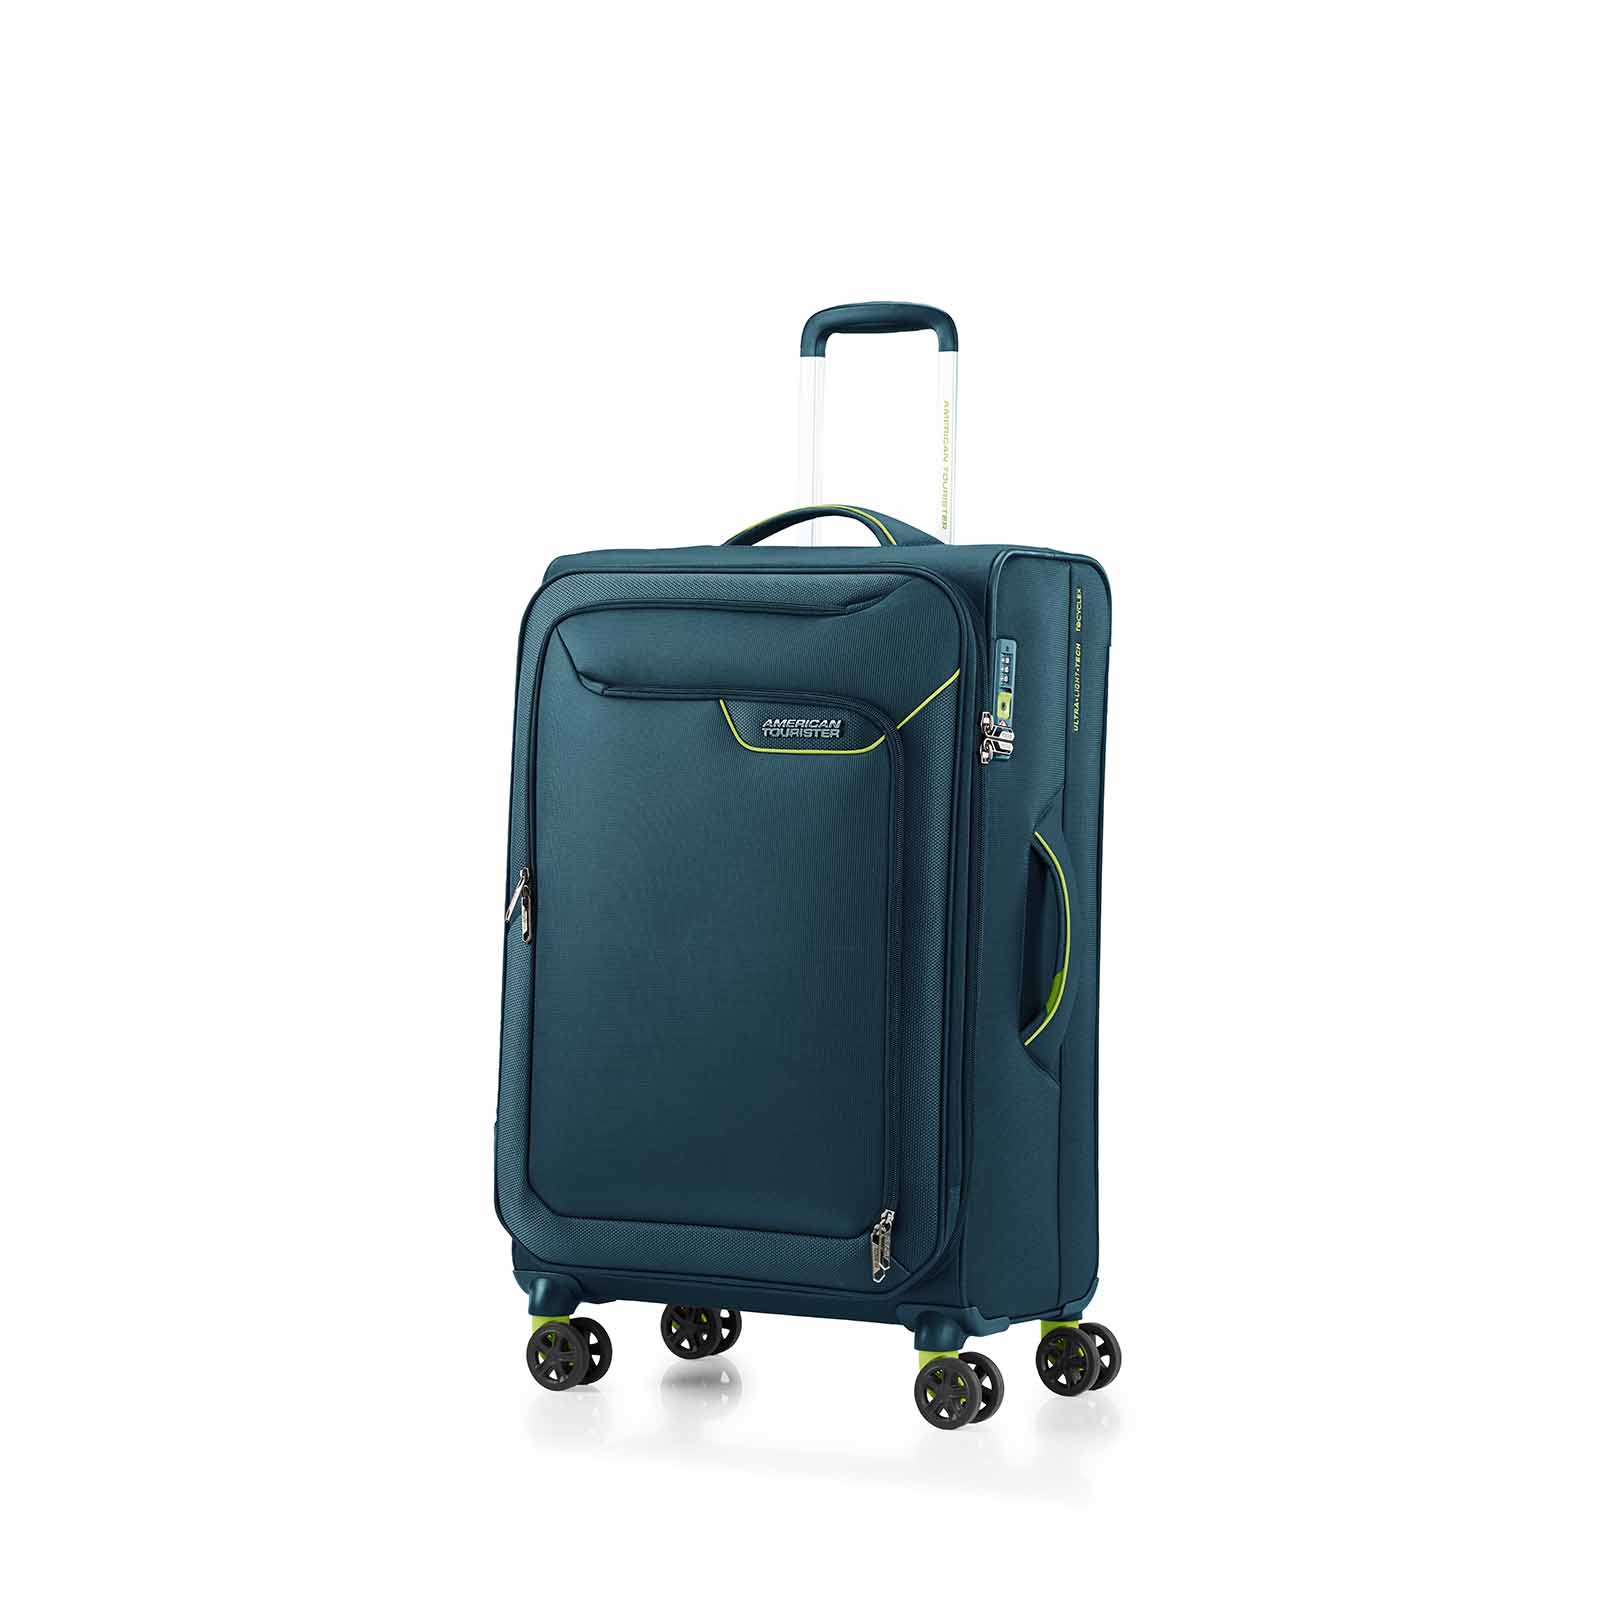 American-Tourister-Applite-4-Eco-71cm-Suitcase-Varsity-Green-Angle